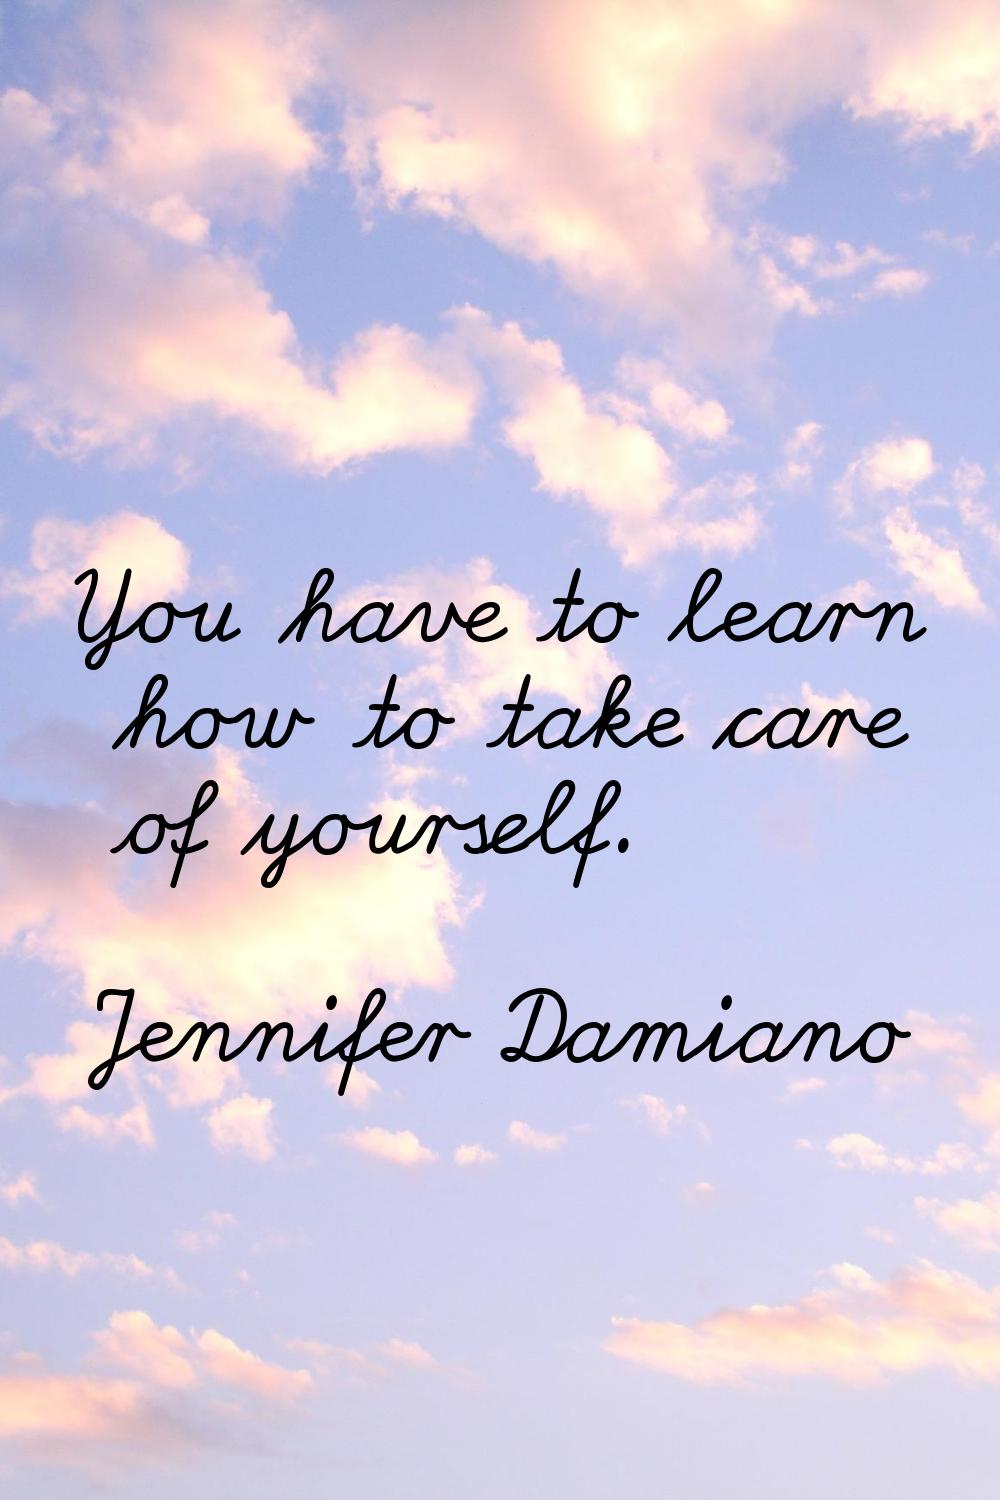 You have to learn how to take care of yourself.